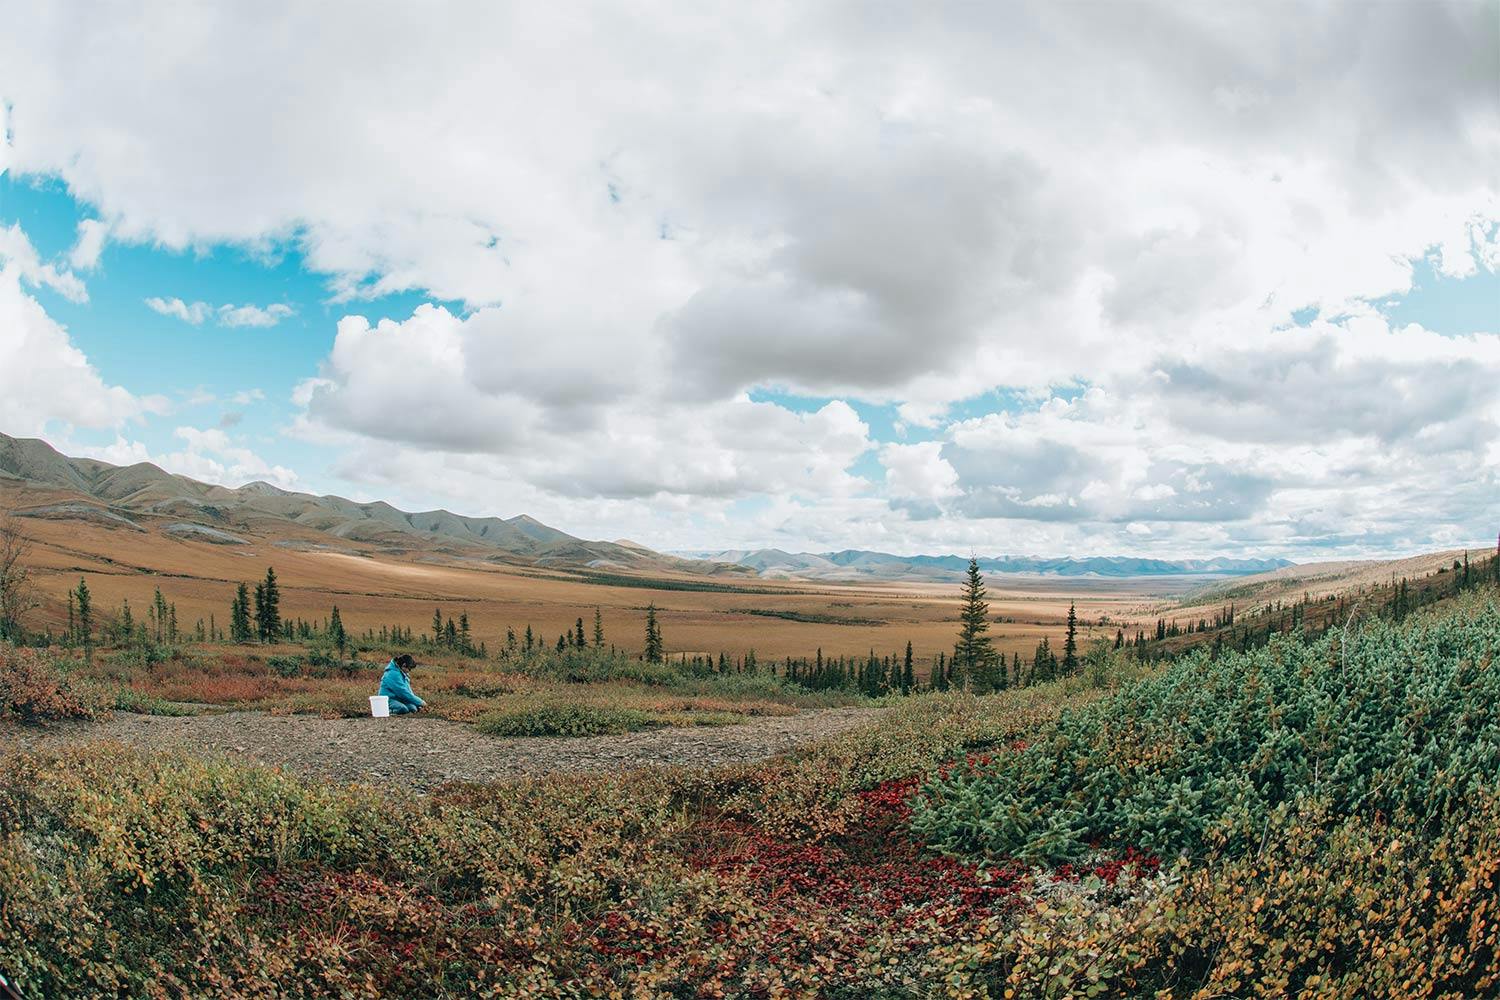 Cranberry shrubs in a vast mountain valley north of the Arctic Circle. In the distance, a woman picks cranberries.